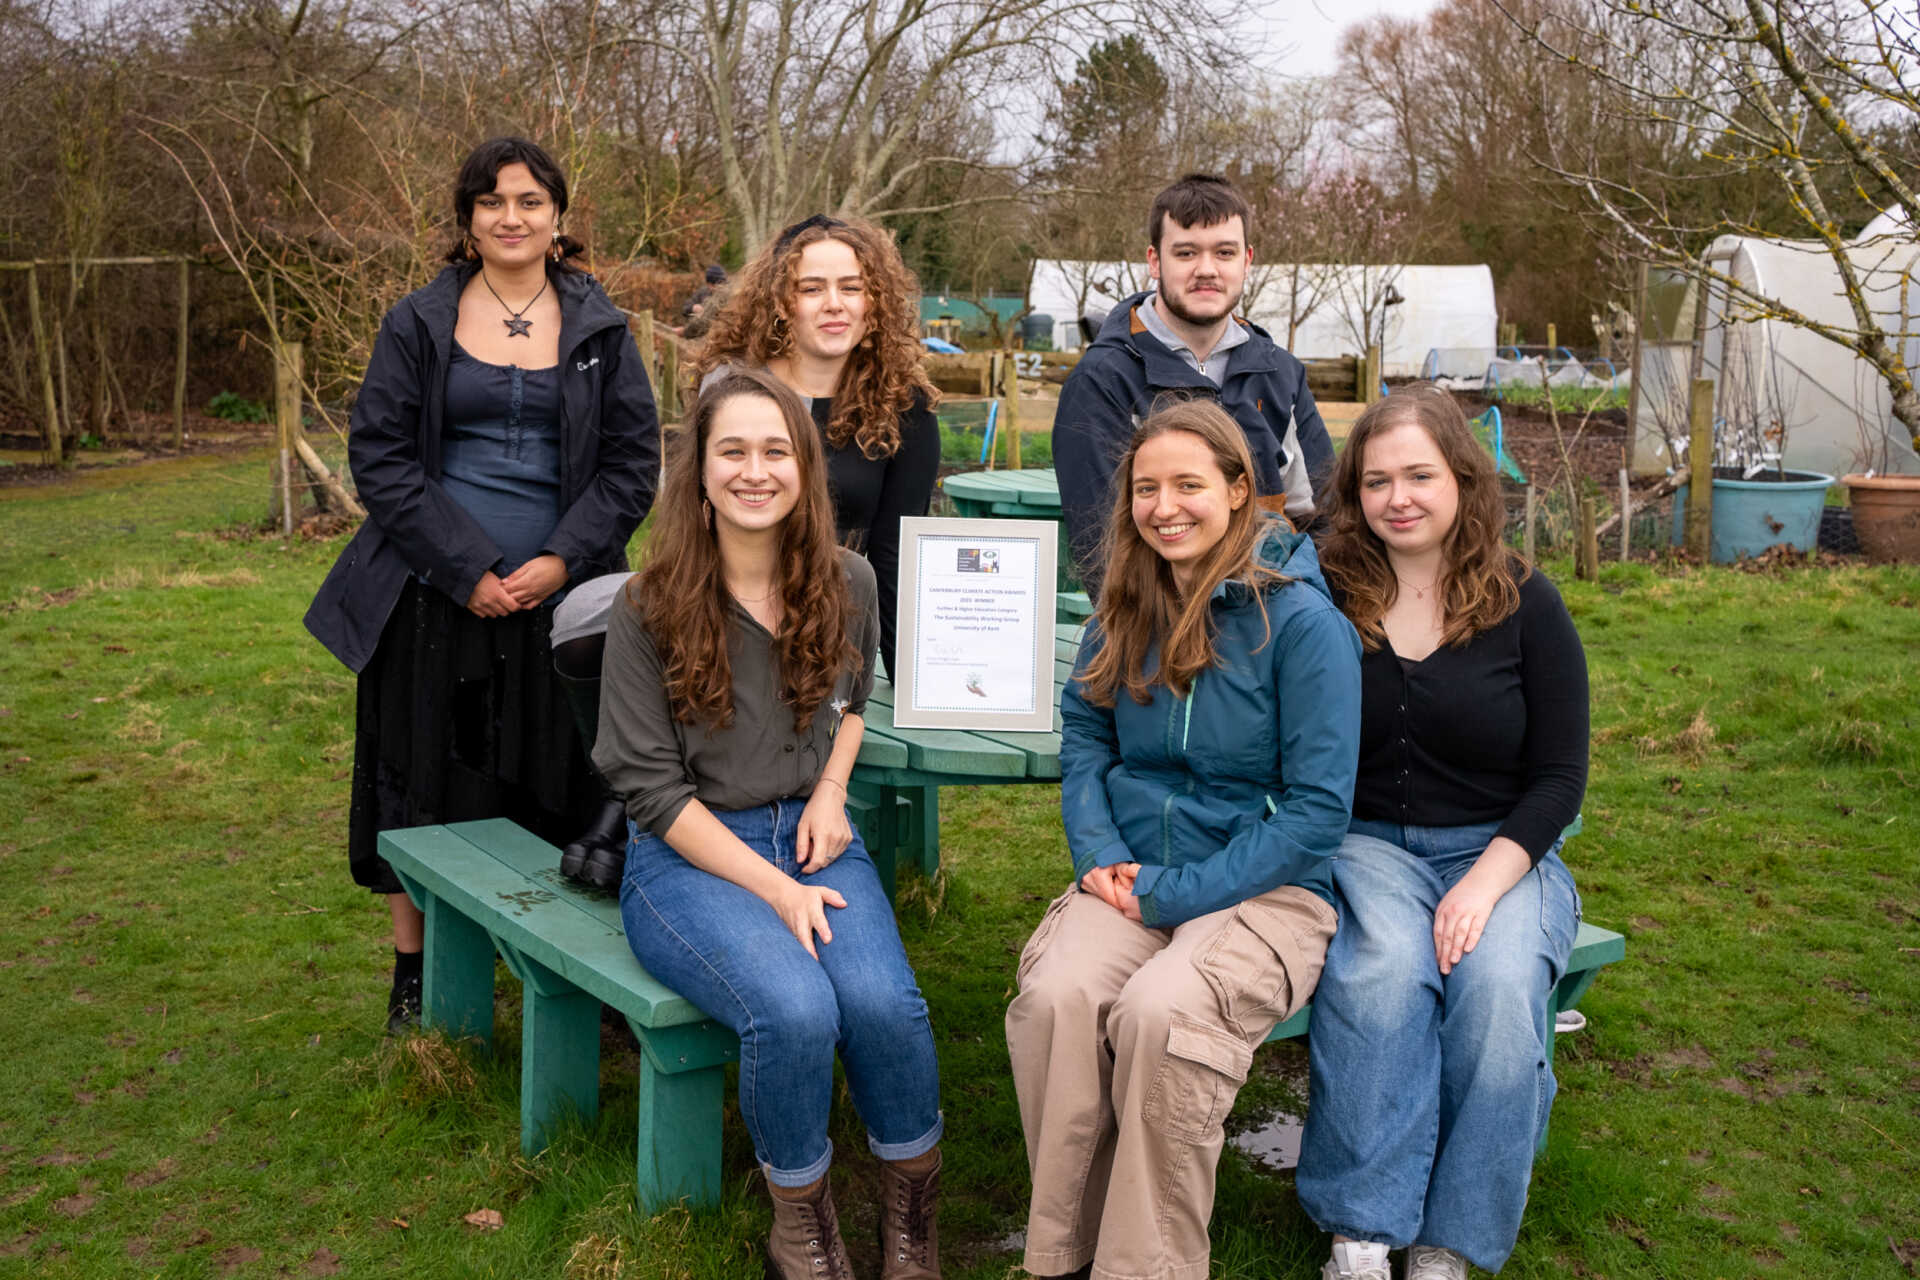 The Sustainability Working Group sitting smiling on a bench with their award